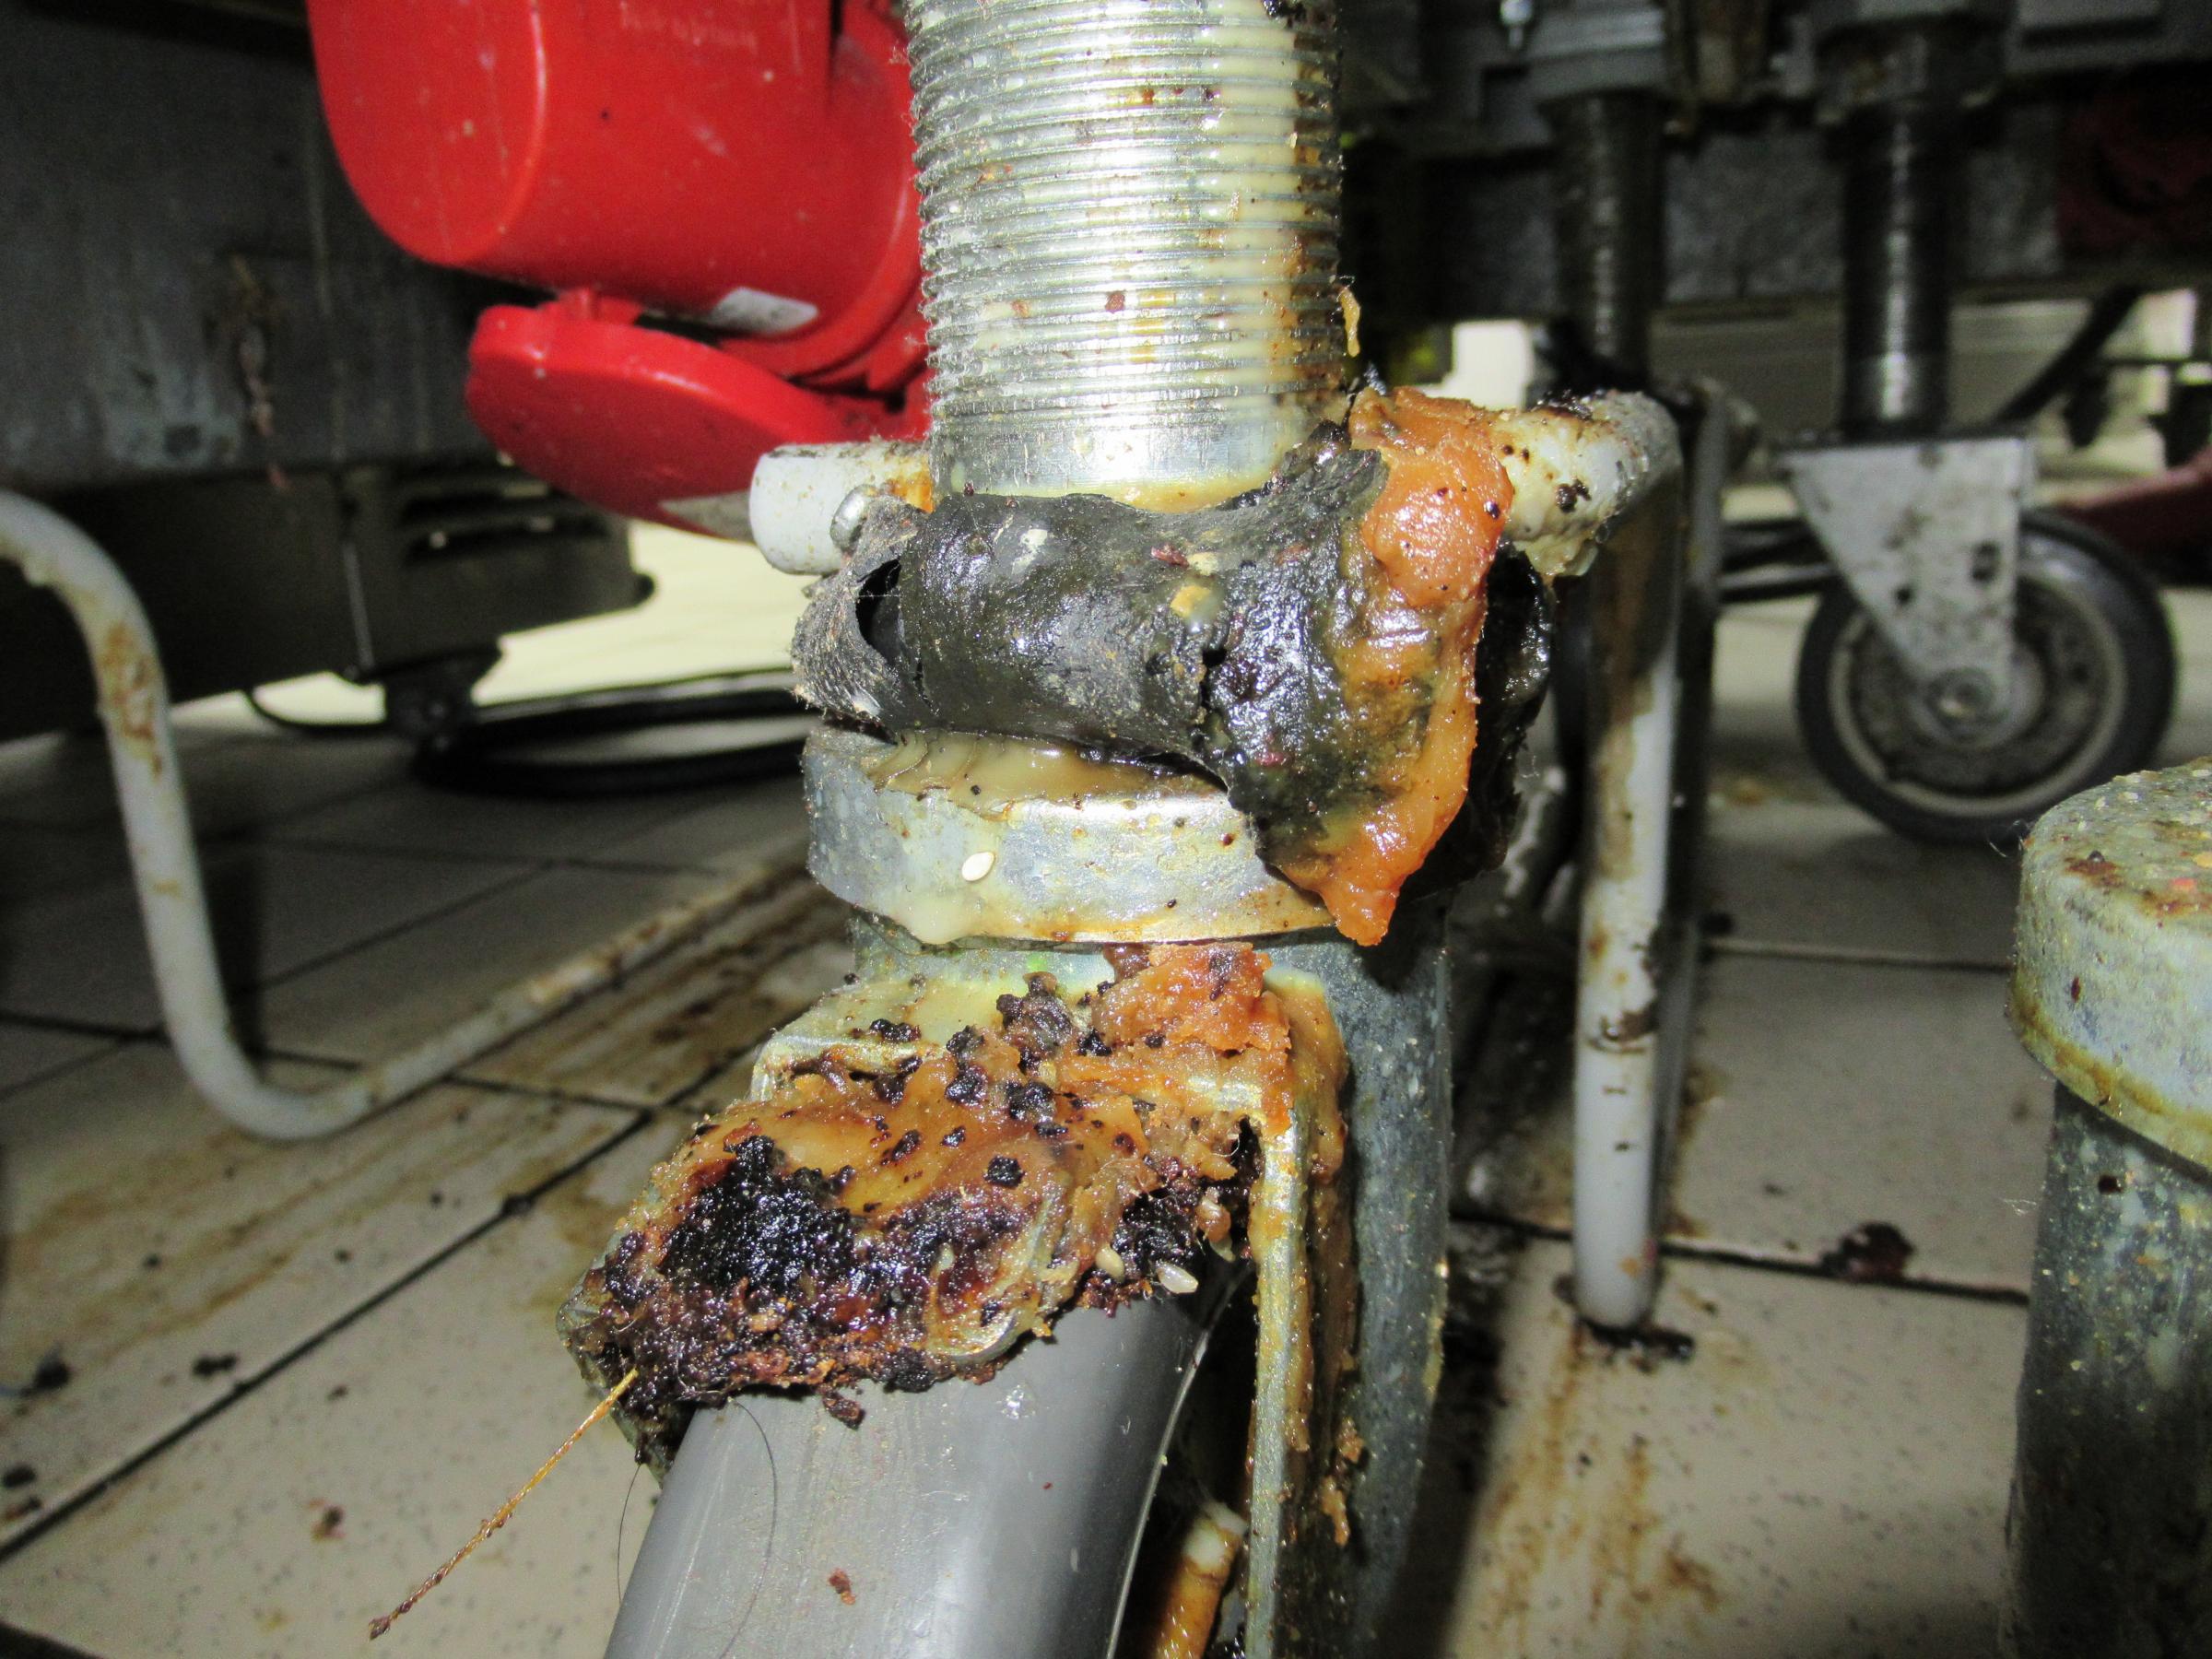 Grease and mouse droppings were discovered in the Leytonstone branch of McDonalds.